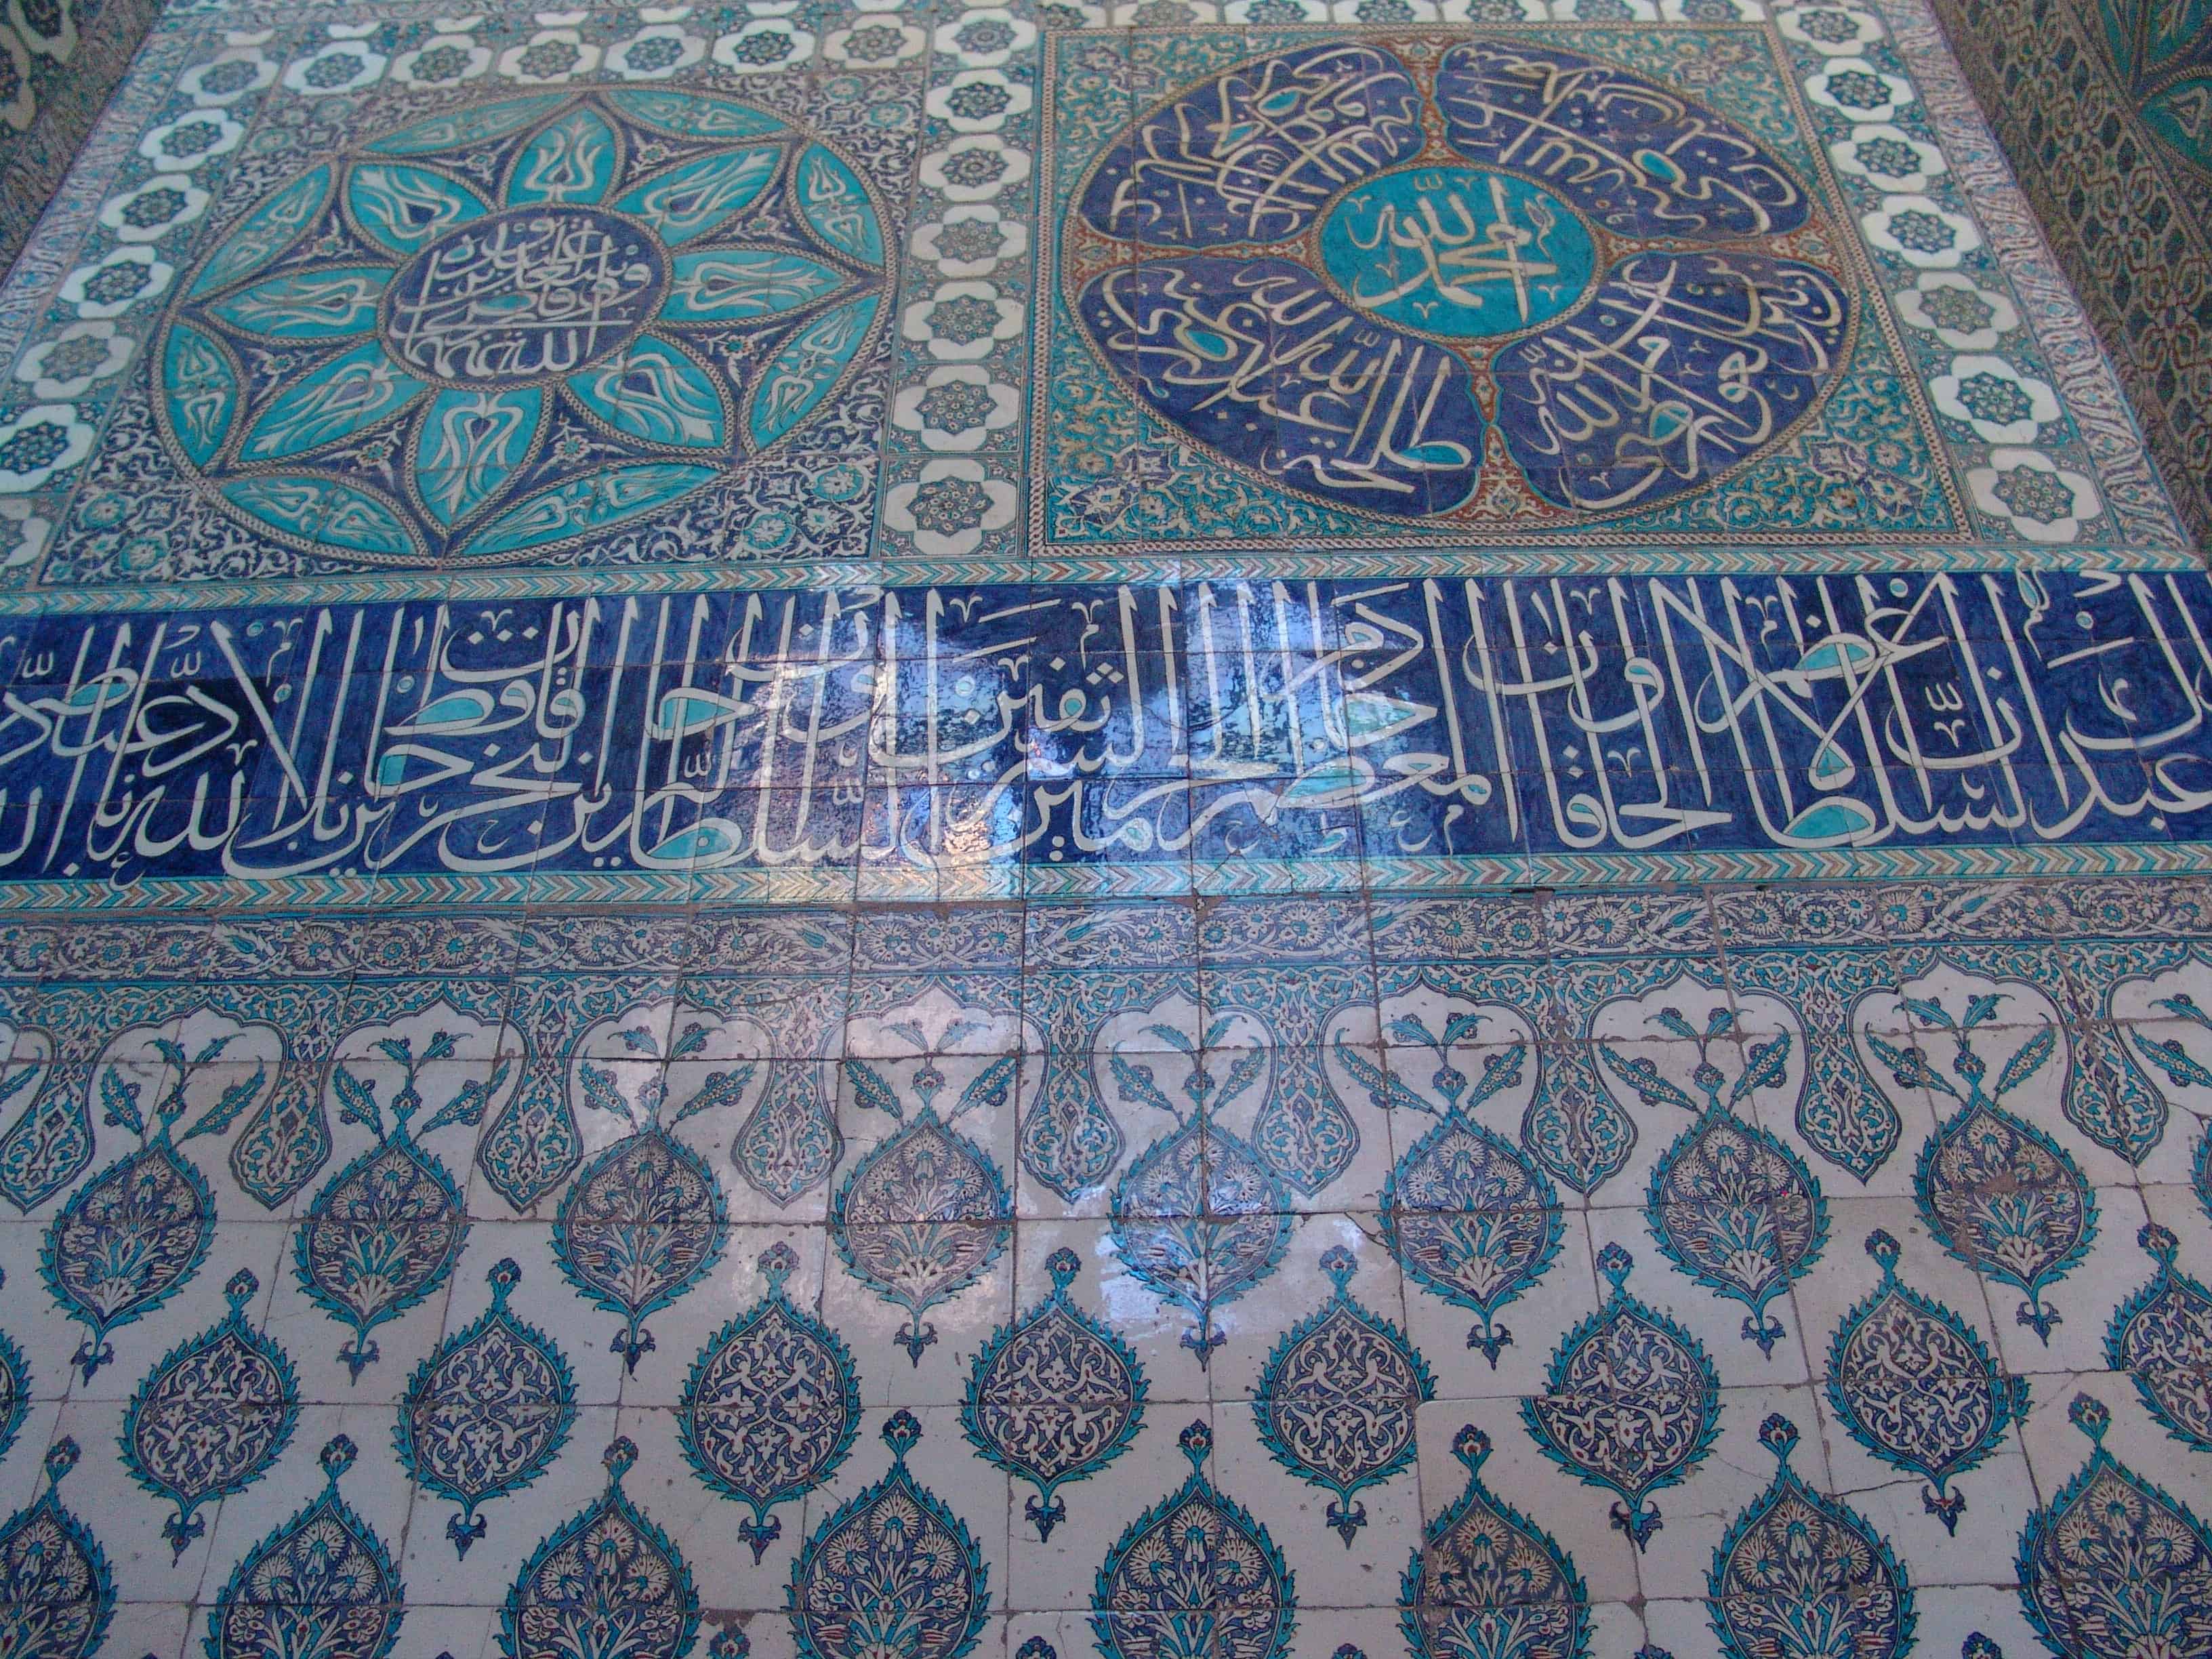 Tiles in the Hall of the Ablutions Fountain in the Imperial Harem at Topkapi Palace in Istanbul, Turkey